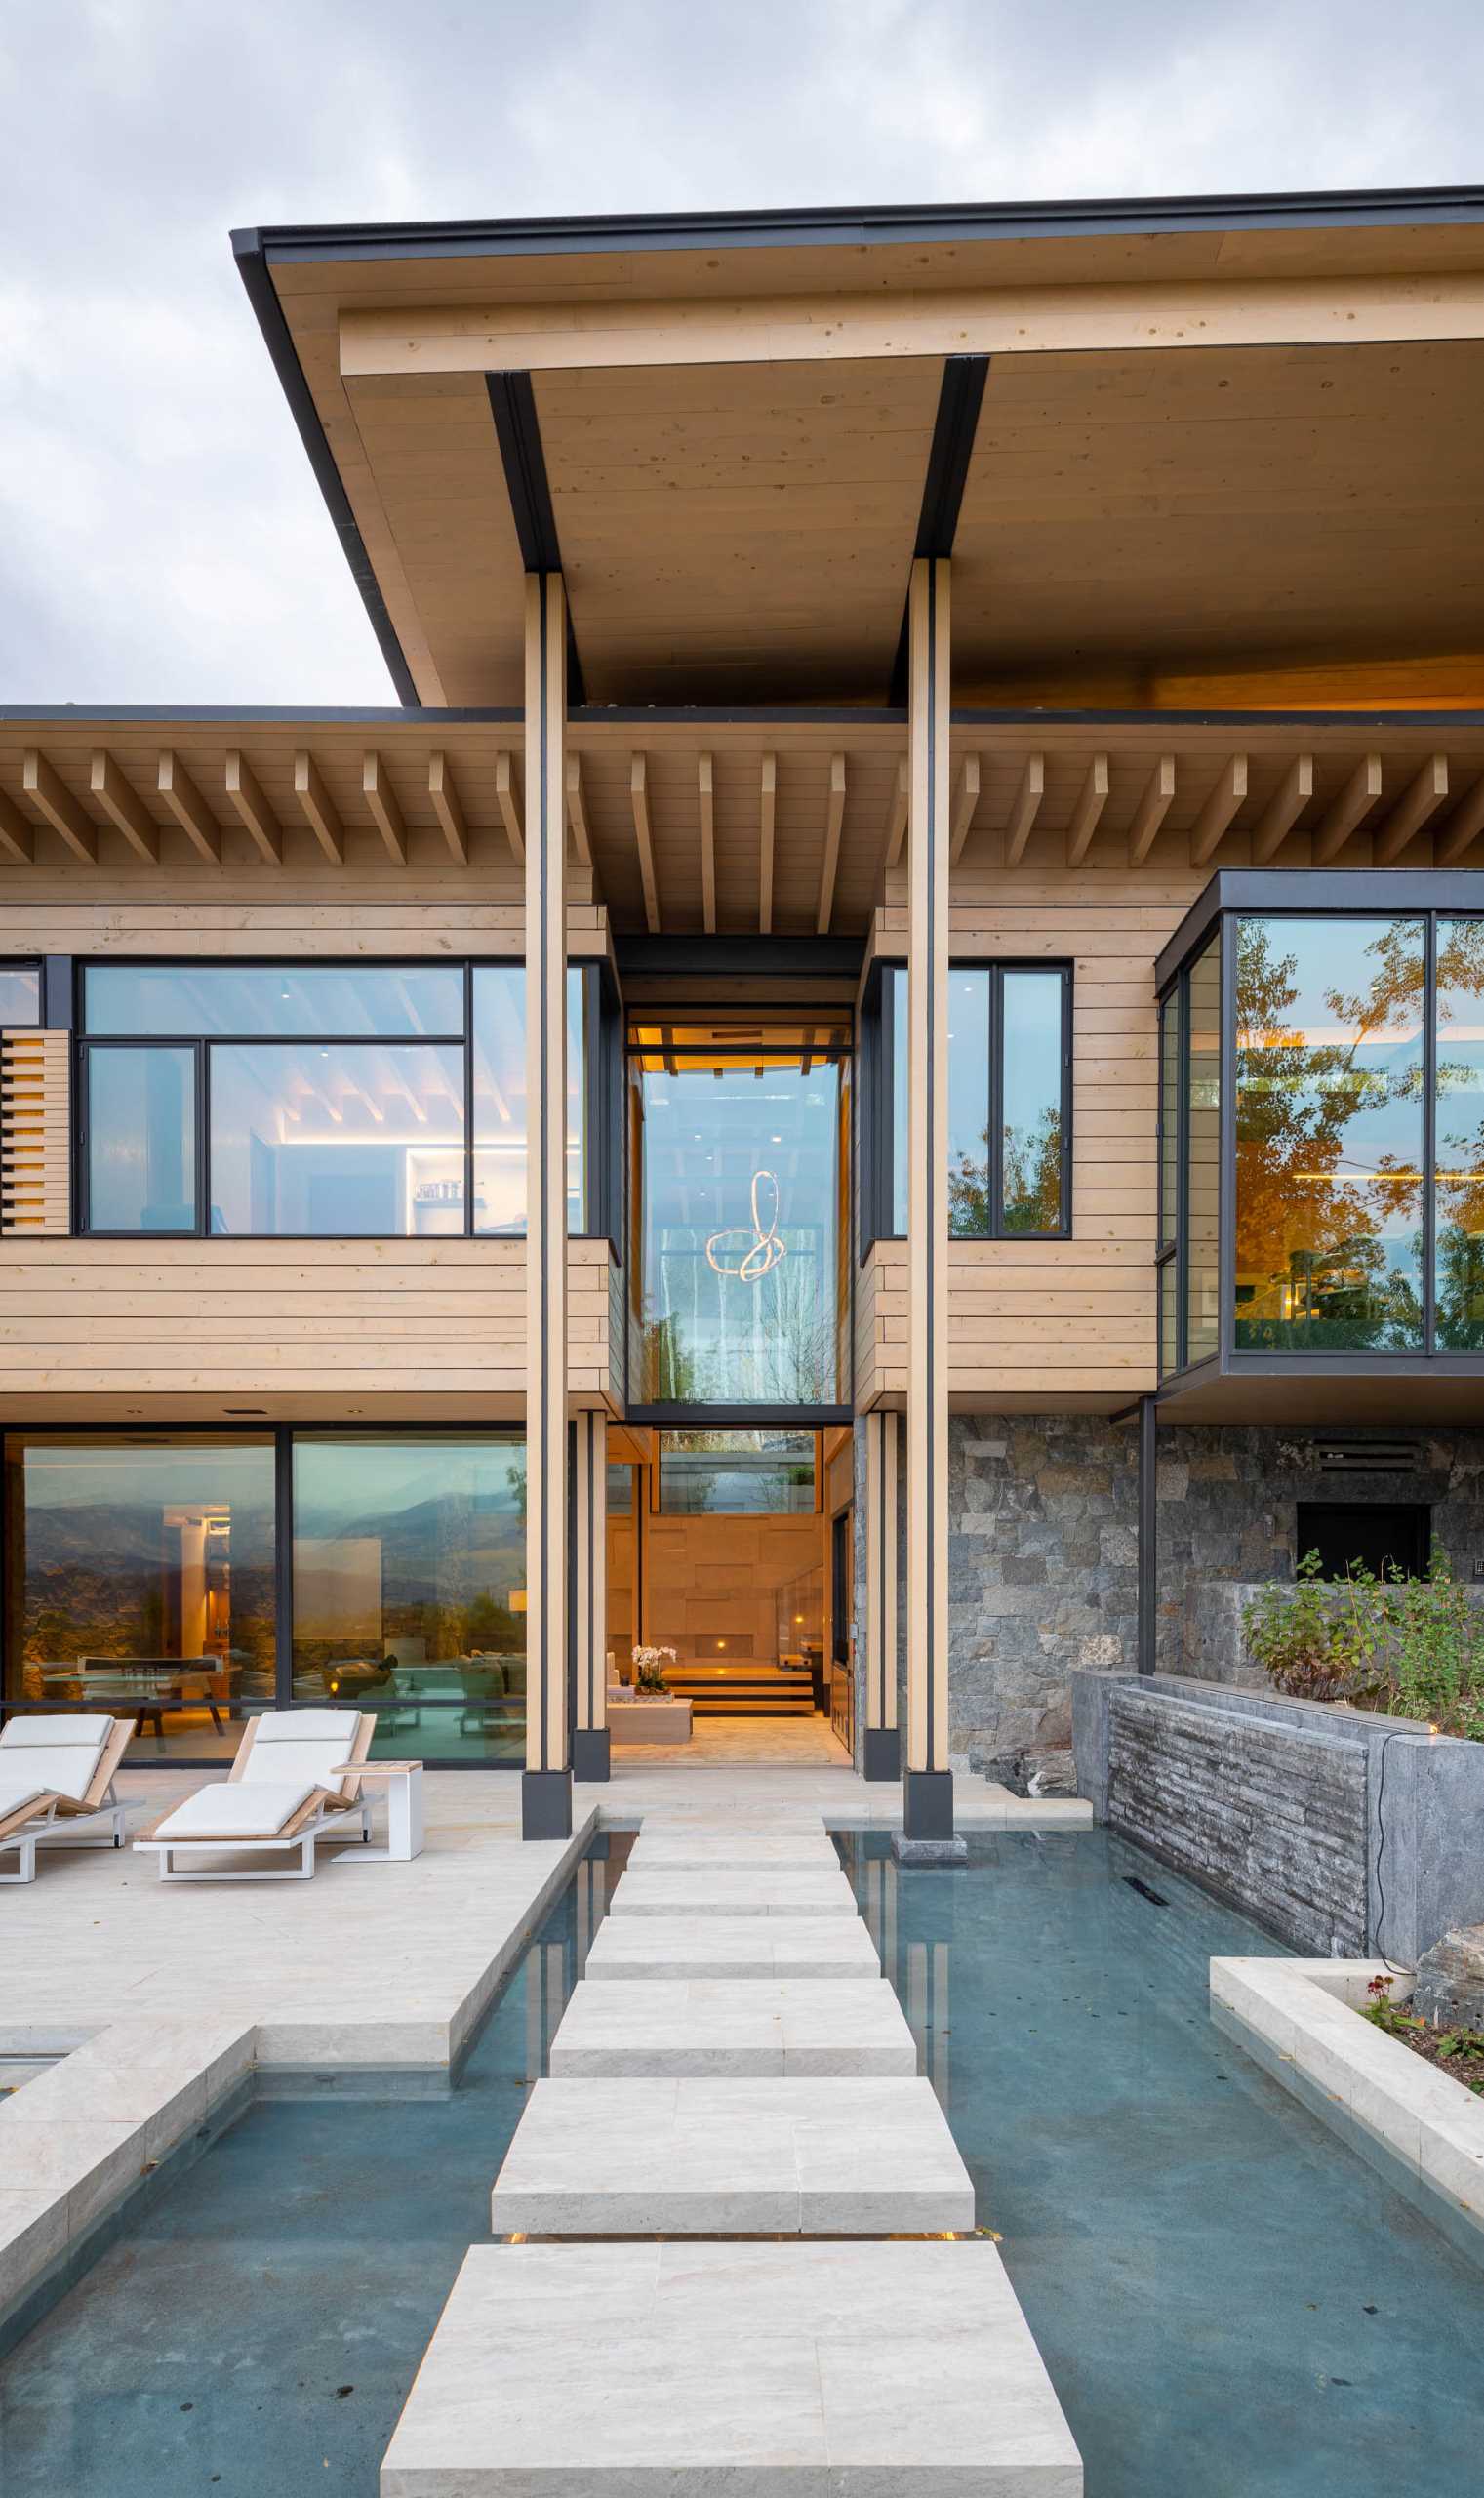 A contemporary mountain home clad in stone, wood, steel, and glass, also has a swimming pool and water feature.